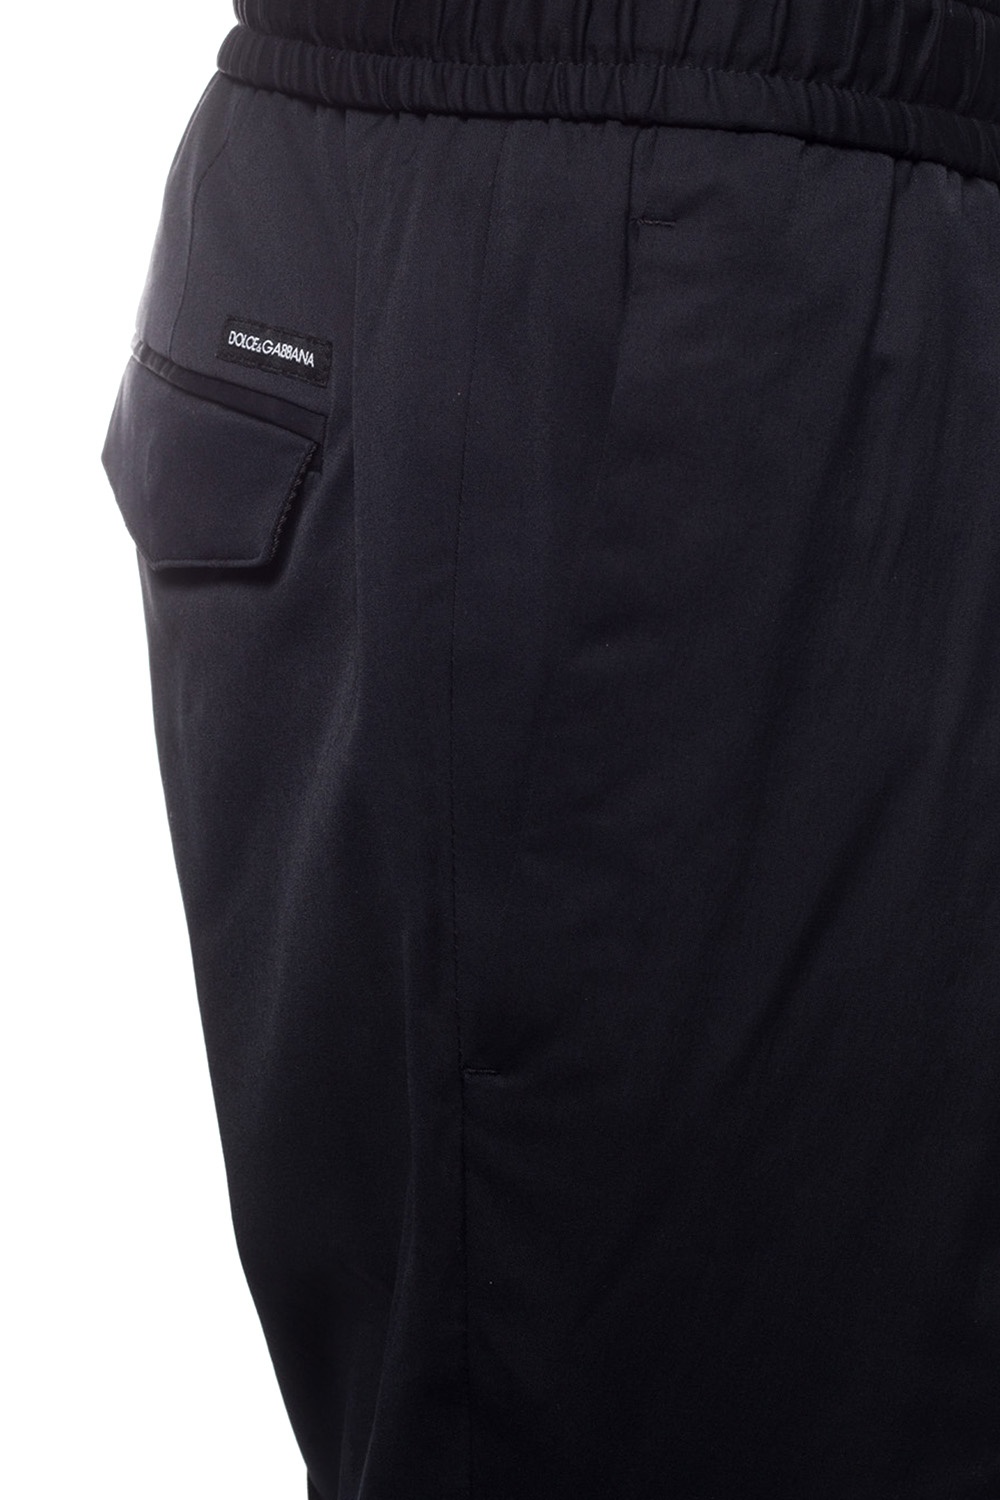 Dolce & Gabbana Mid trousers with topstitching detail